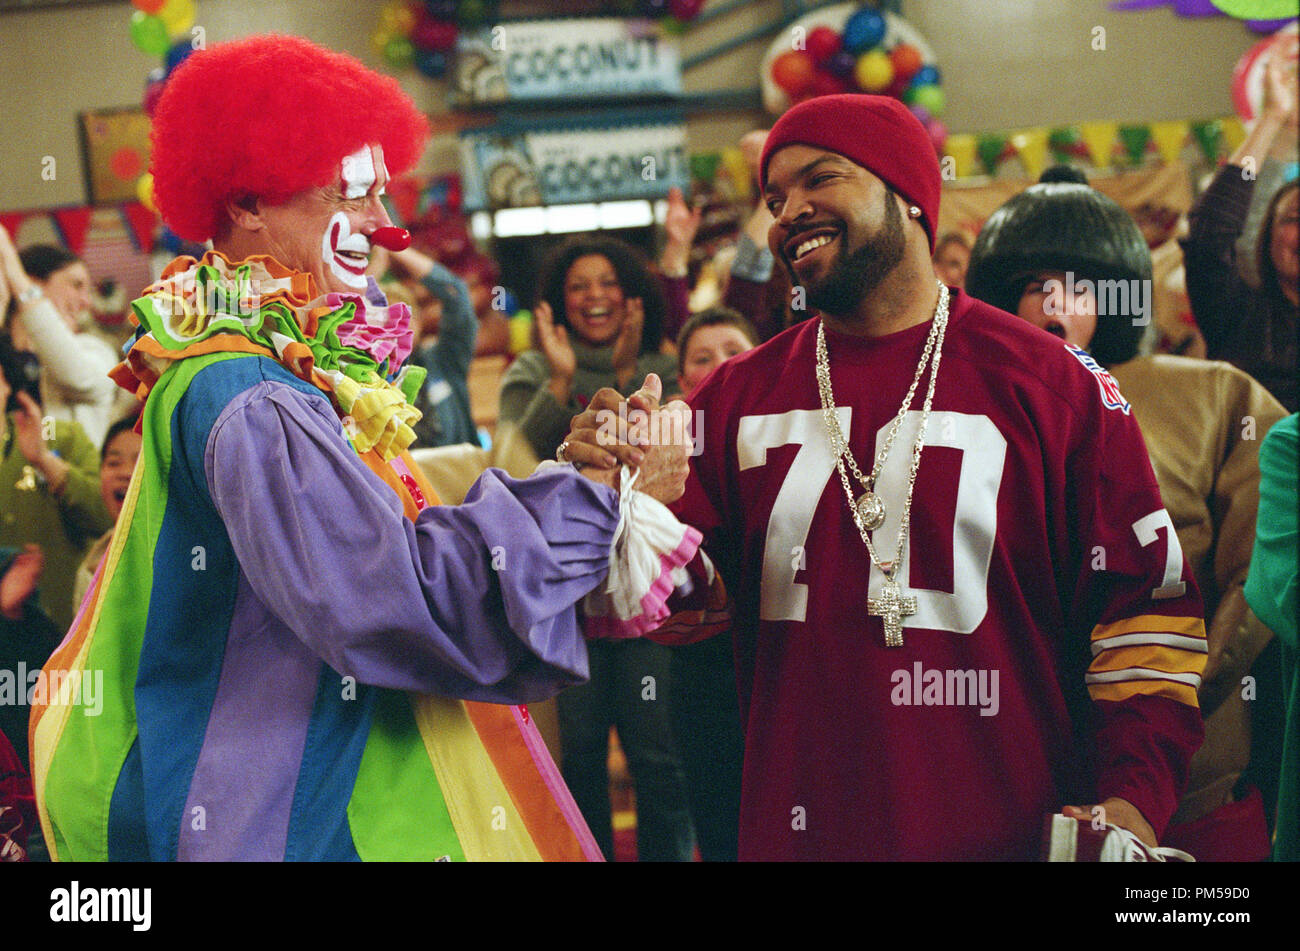 Studio Publicity Still from 'Are We There Yet?' Jerry Hardin, Ice Cube © 2005 Columbia Pictures Photo by Rob McEwan  File Reference # 307362313THA  For Editorial Use Only -  All Rights Reserved Stock Photo